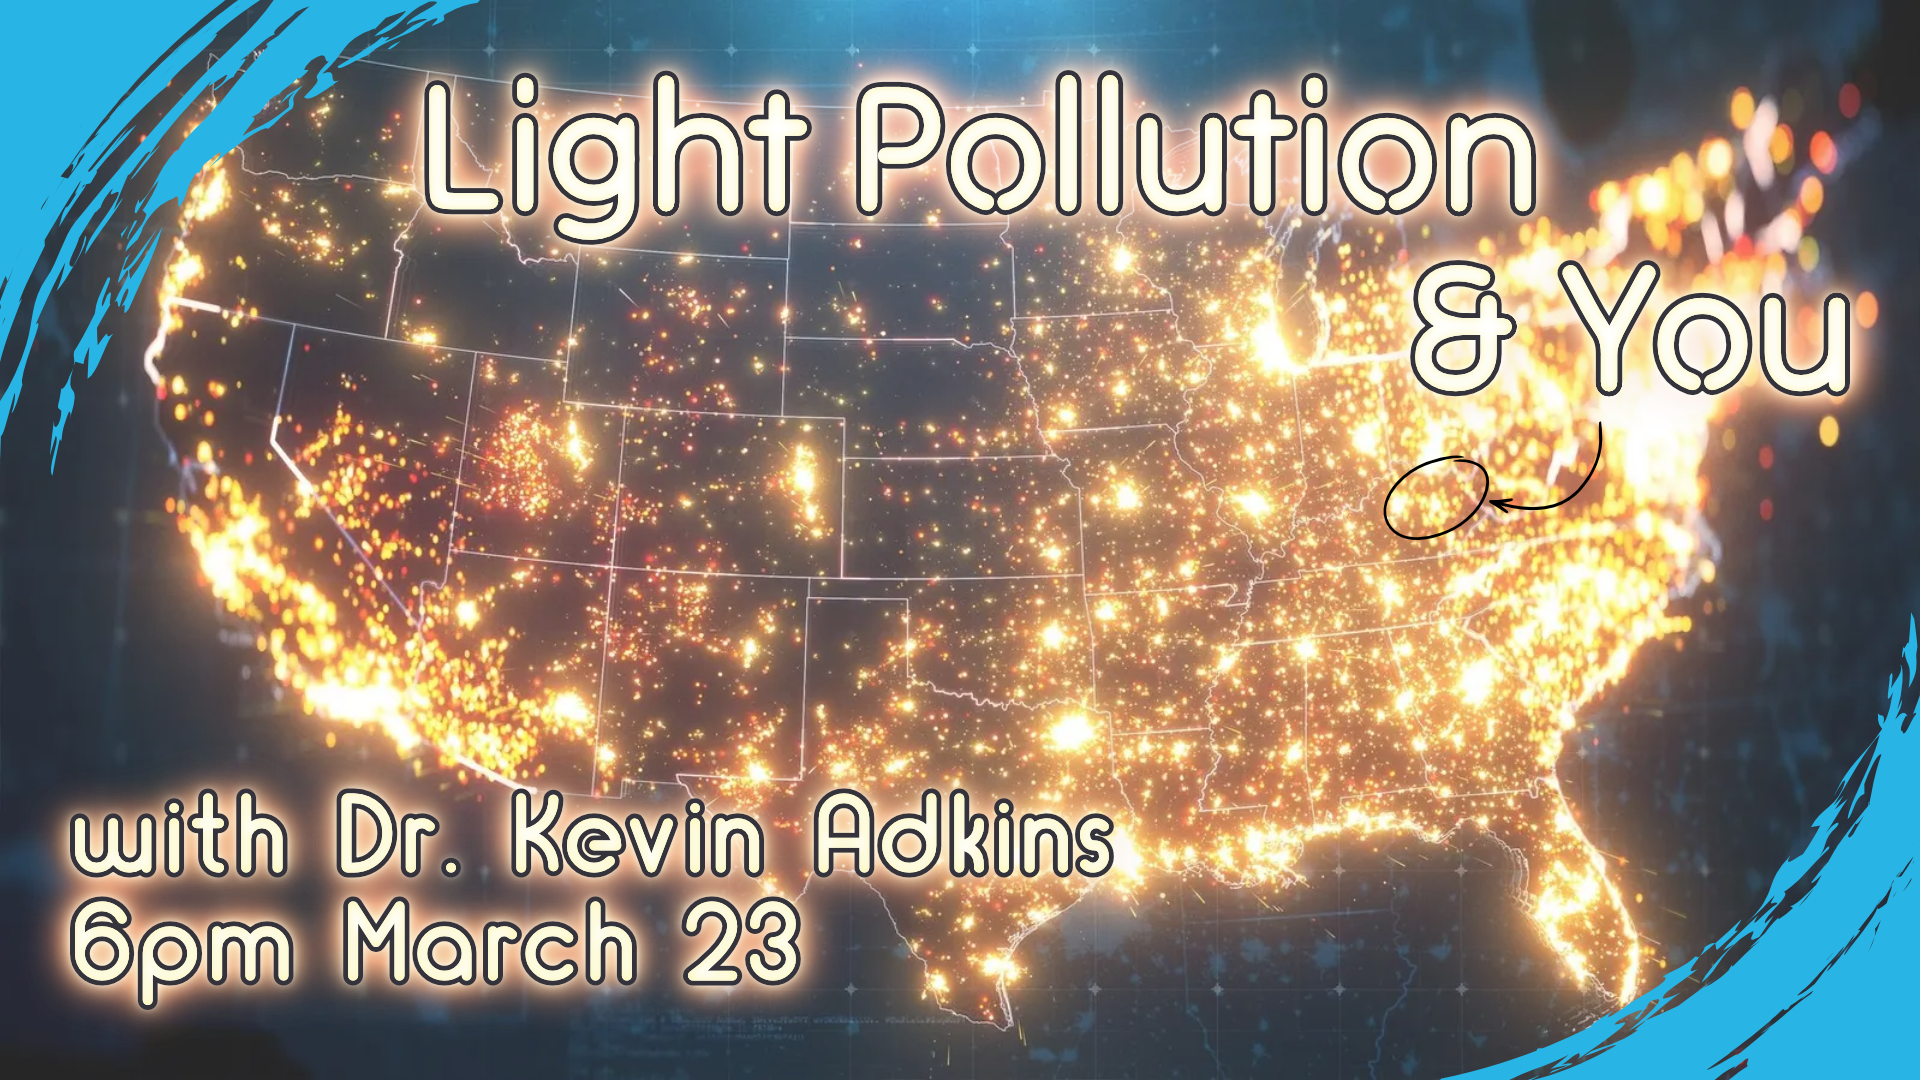 Light Pollution & You with Dr. Kevin Adkins, March 23 at 6pm, intended for all ages